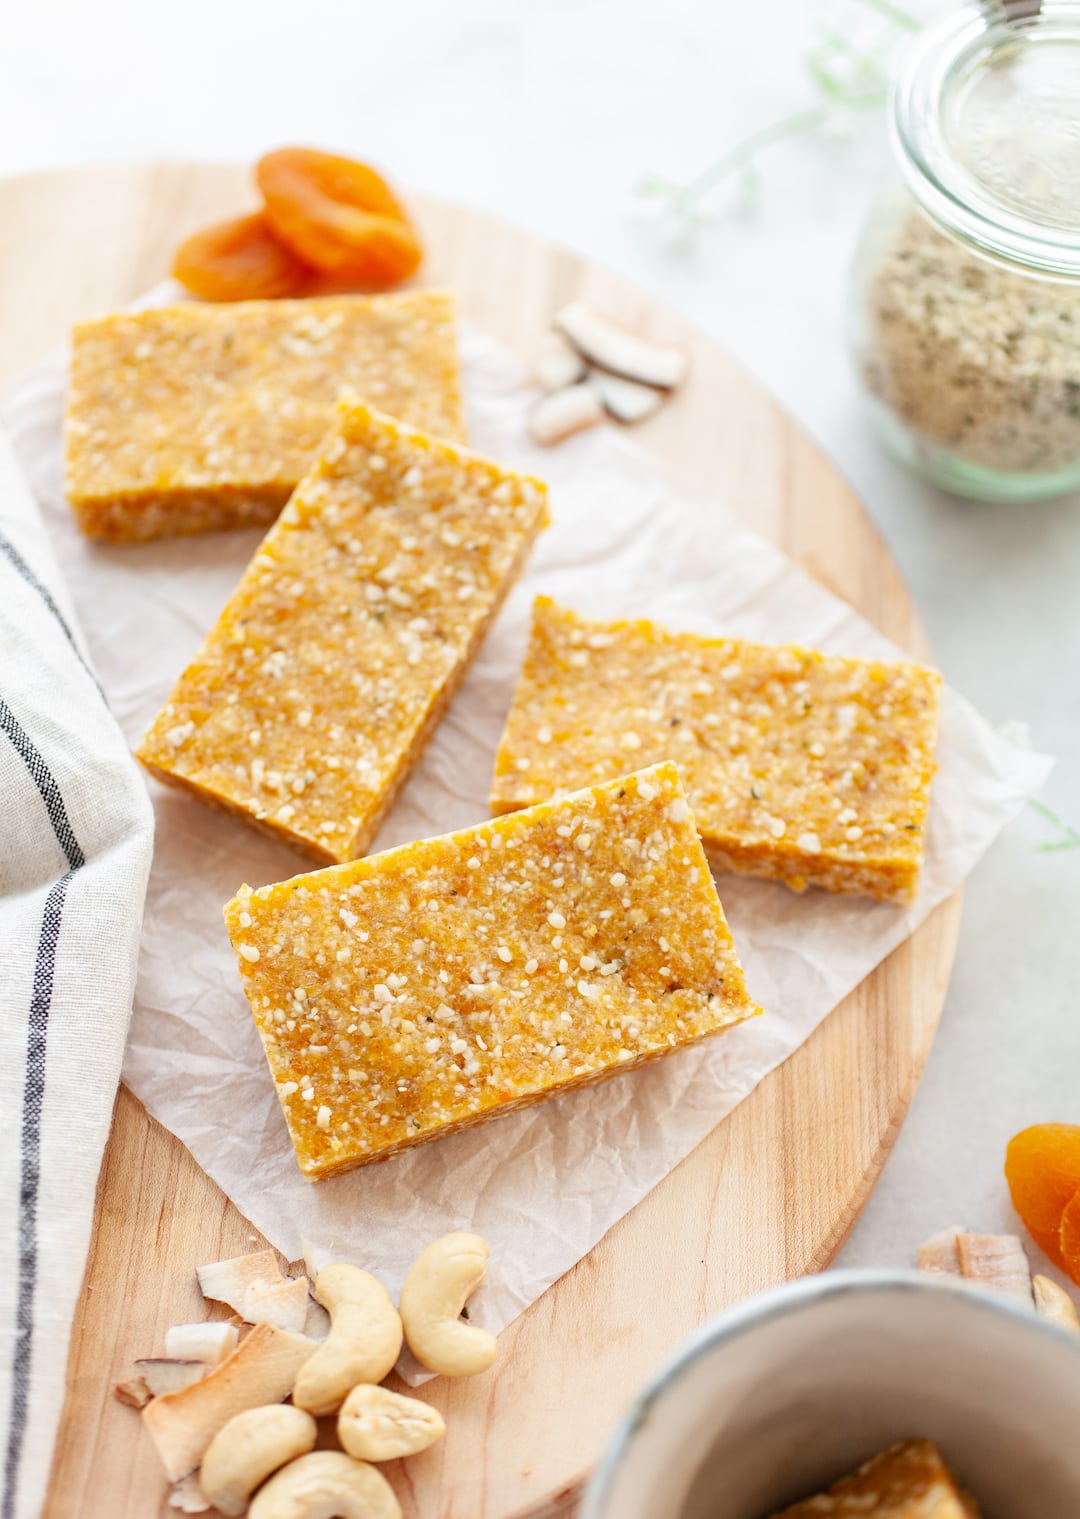 Apricot Cashew Energy Bars on a wood board with apricots